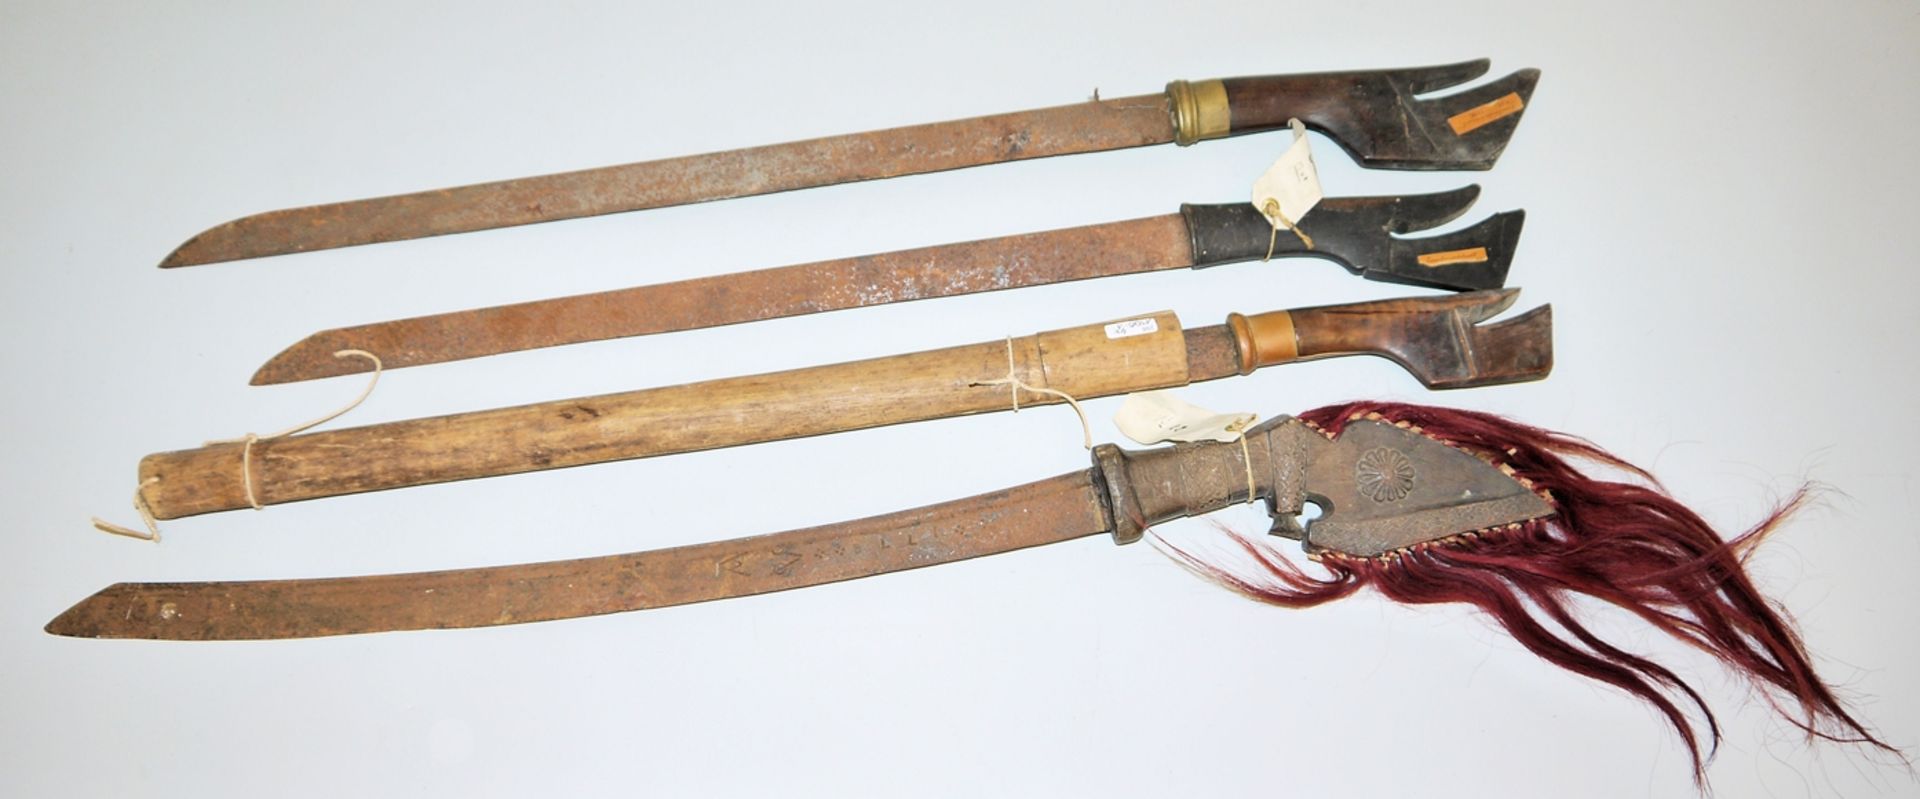 Four traditional Indonesian swords from Timor and Sulawesi 19th cent.